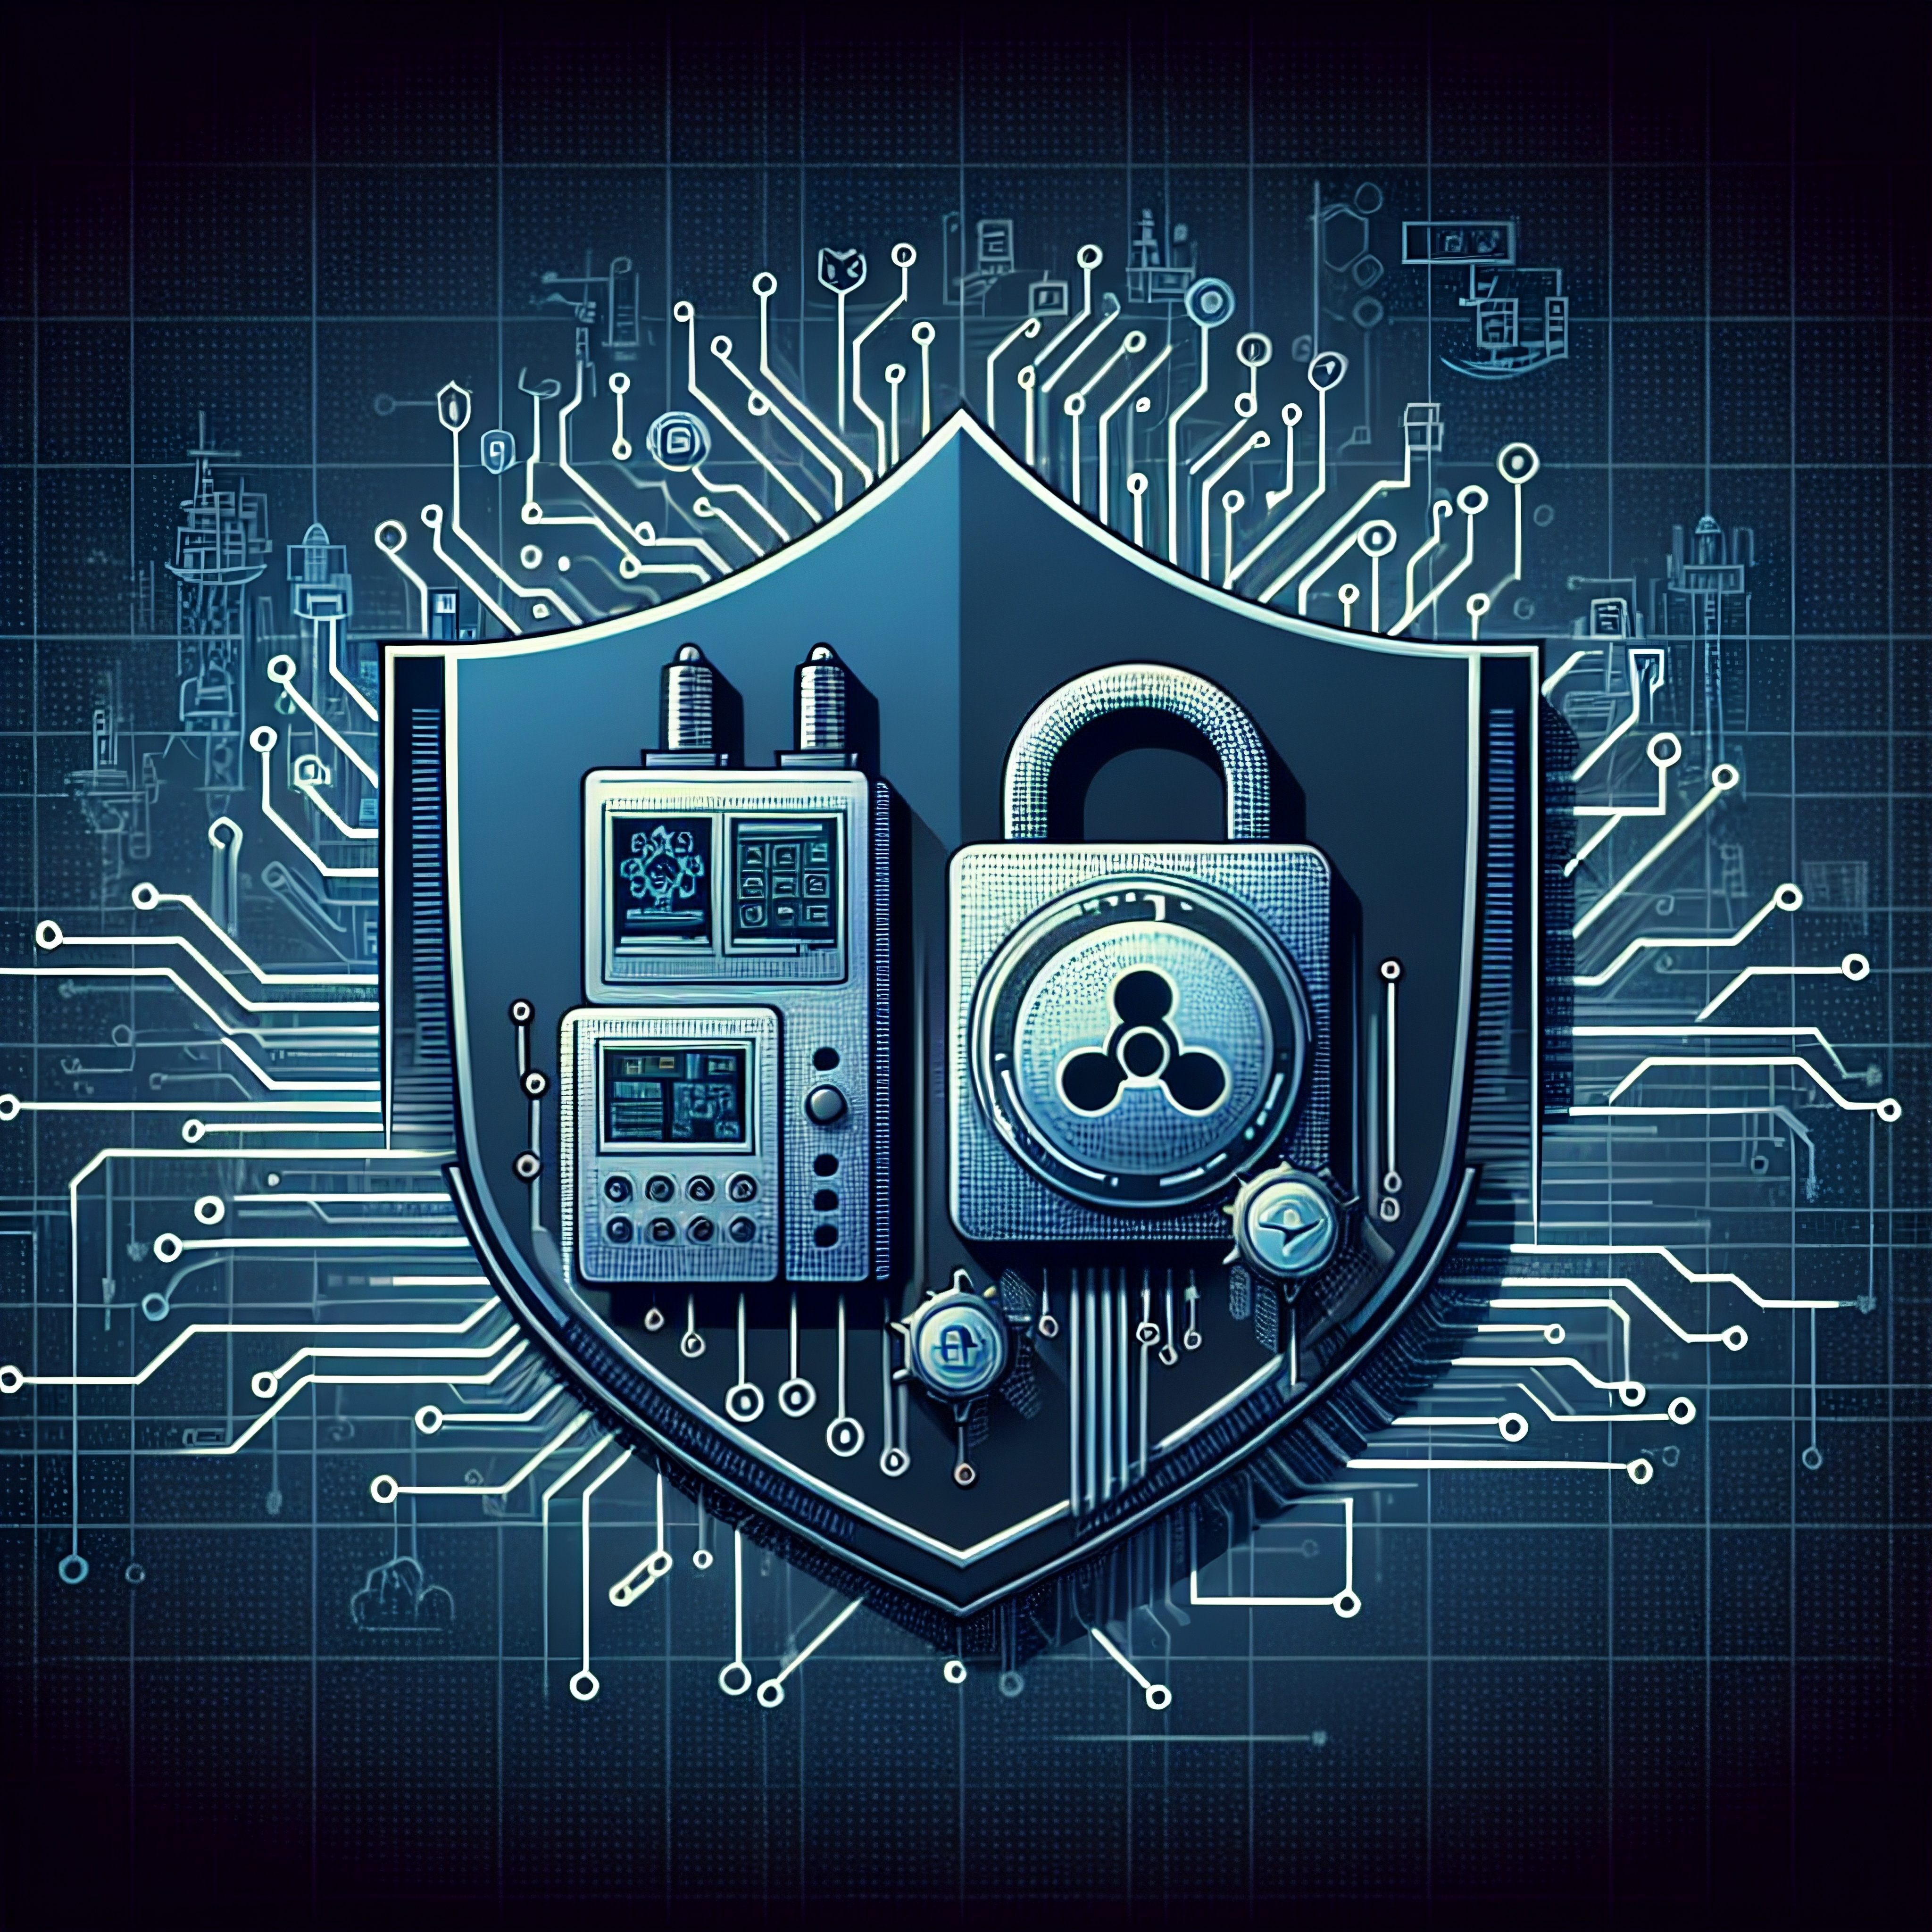 The Future of Industrial Cybersecurity: IEC 62443 Meets OTAC